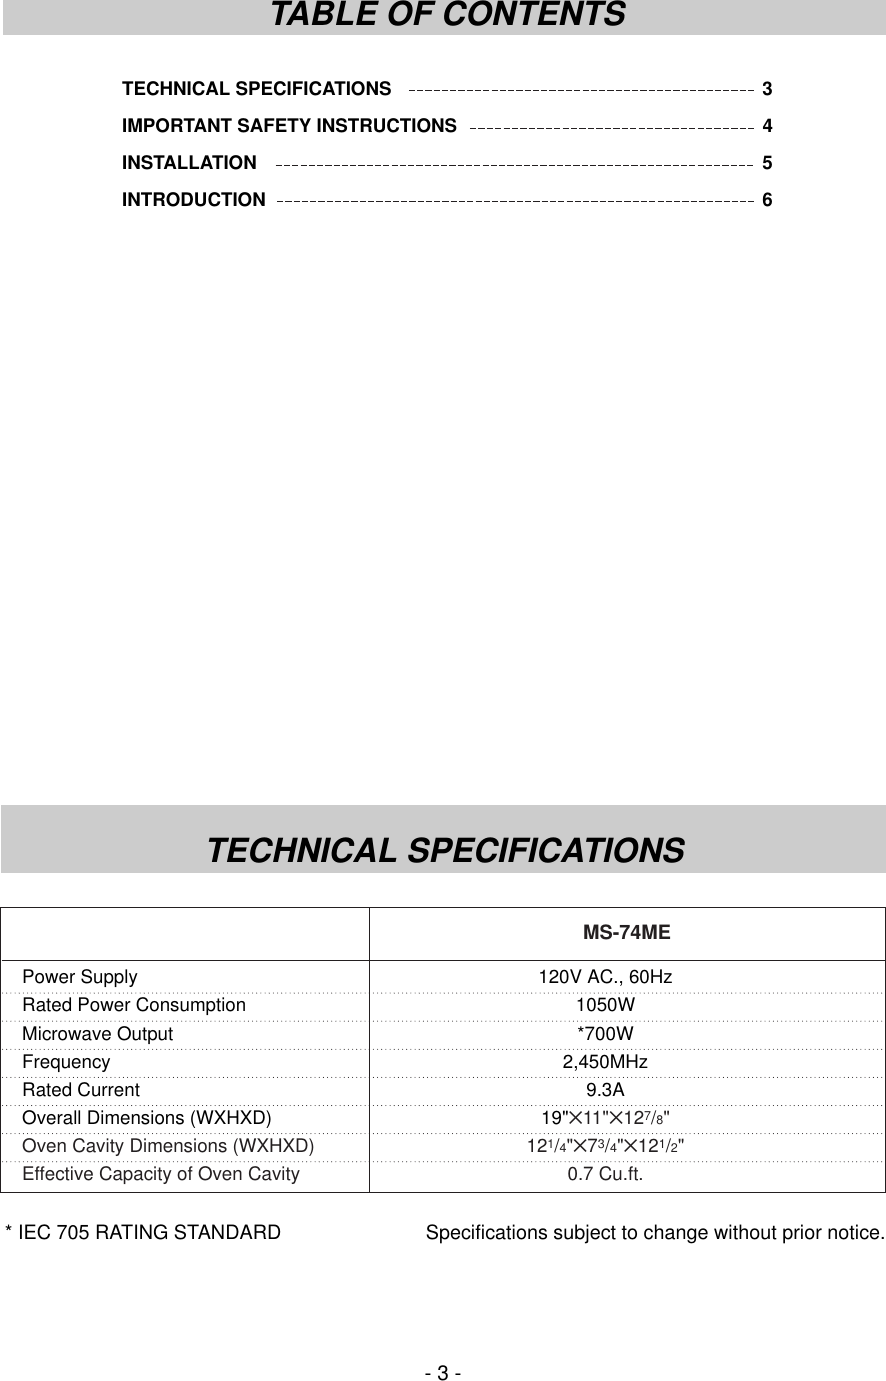 TECHNICAL SPECIFICATIONS 3IMPORTANT SAFETY INSTRUCTIONS 4INSTALLATION 5INTRODUCTION 6- 3 -TABLE OF CONTENTSTECHNICAL SPECIFICATIONS* IEC 705 RATING STANDARD Specifications subject to change without prior notice.Power Supply 120V AC., 60HzRated Power Consumption 1050WMicrowave Output *700WFrequency 2,450MHzRated Current 9.3AOverall Dimensions (WXHXD) 19&quot;✕11&quot;✕127/8&quot;Oven Cavity Dimensions (WXHXD) 121/4&quot;✕73/4&quot;✕121/2&quot;Effective Capacity of Oven Cavity 0.7 Cu.ft.MS-74ME